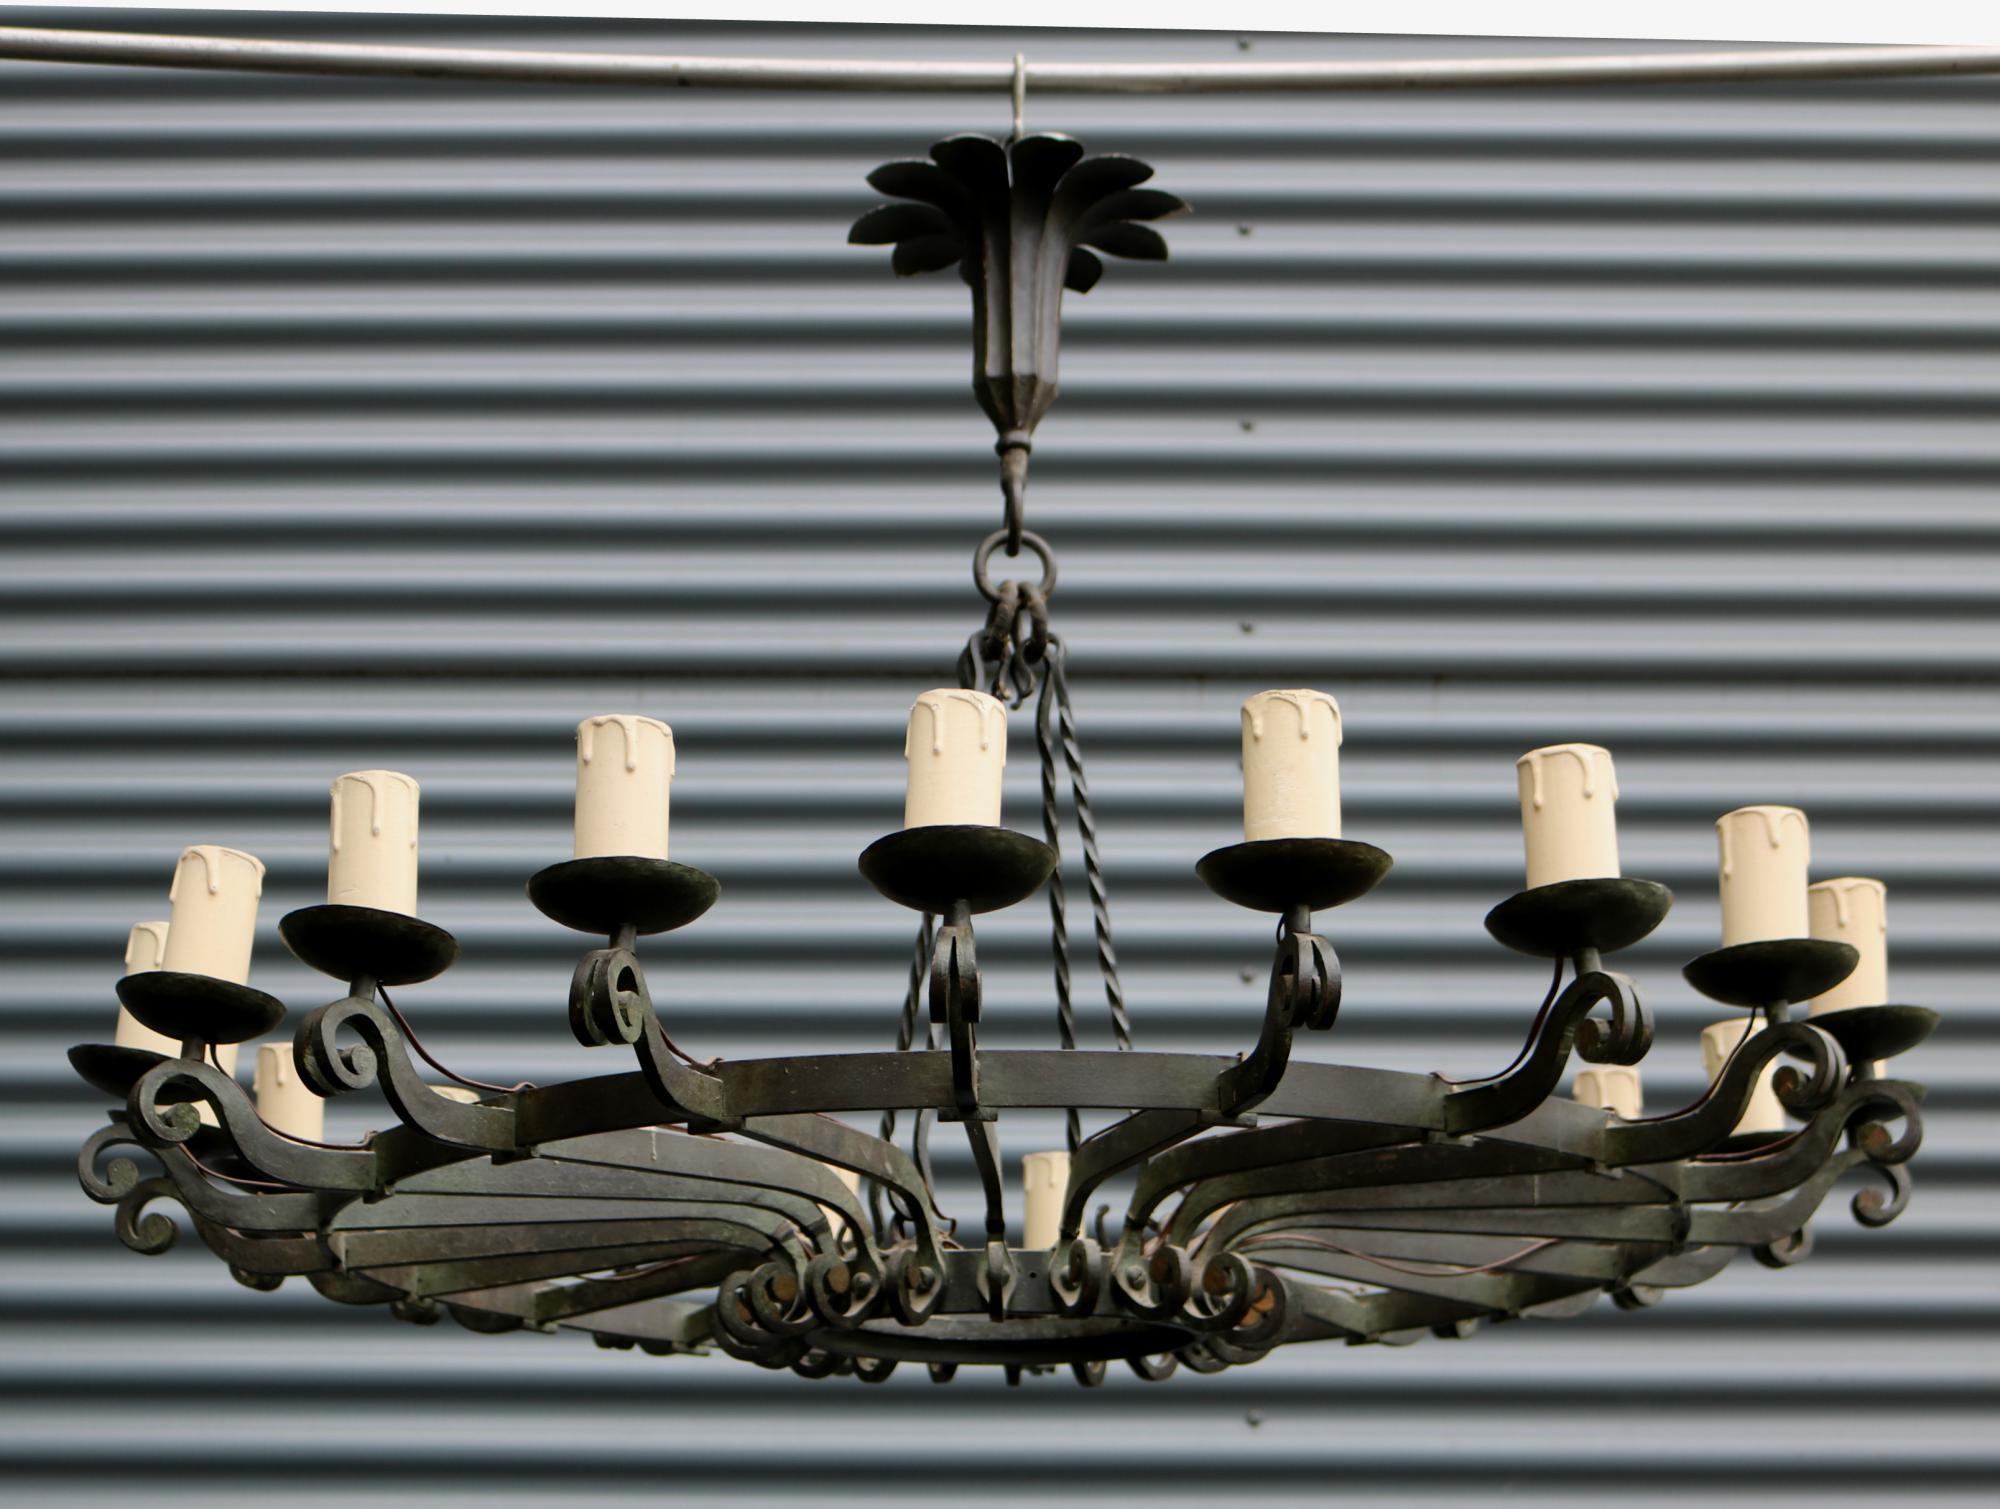 Large 20 light forged iron a-deco chandelier .